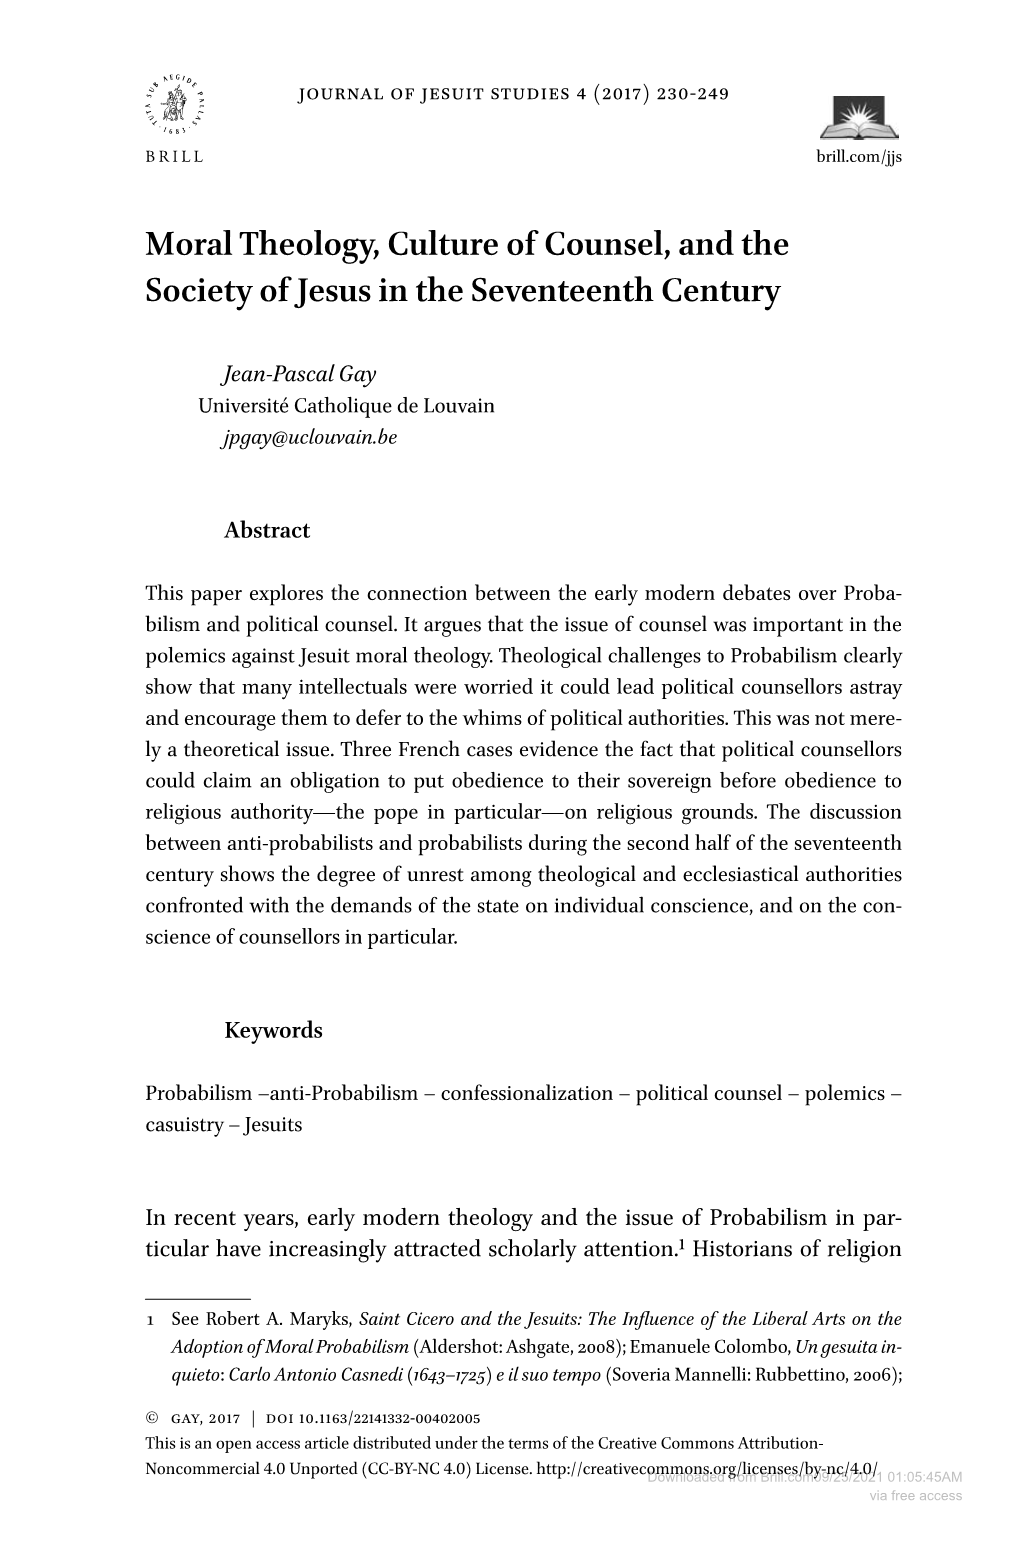 Moral Theology, Culture of Counsel, and the Society of Jesus in the Seventeenth Century